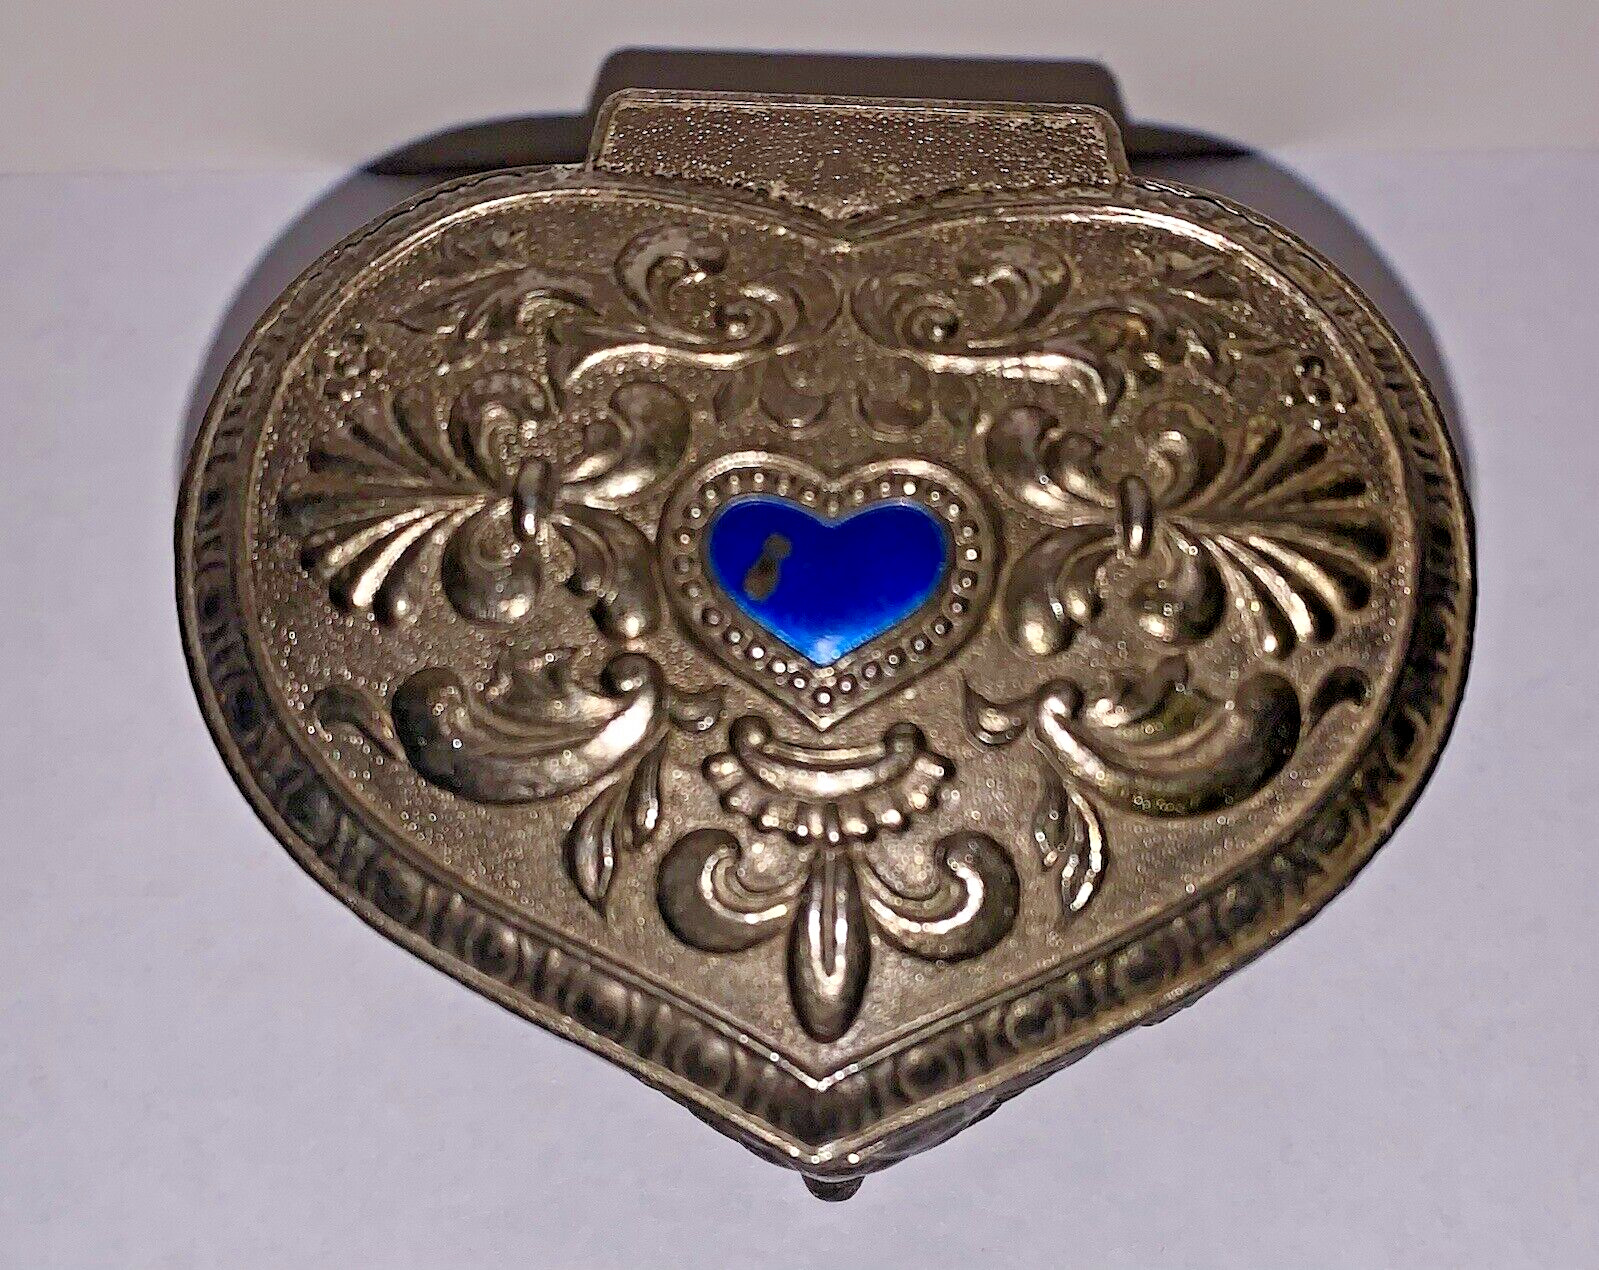 VTG Small Silver Tone Ornate Heart Lined Footed Trinket Jewelry Box Japan